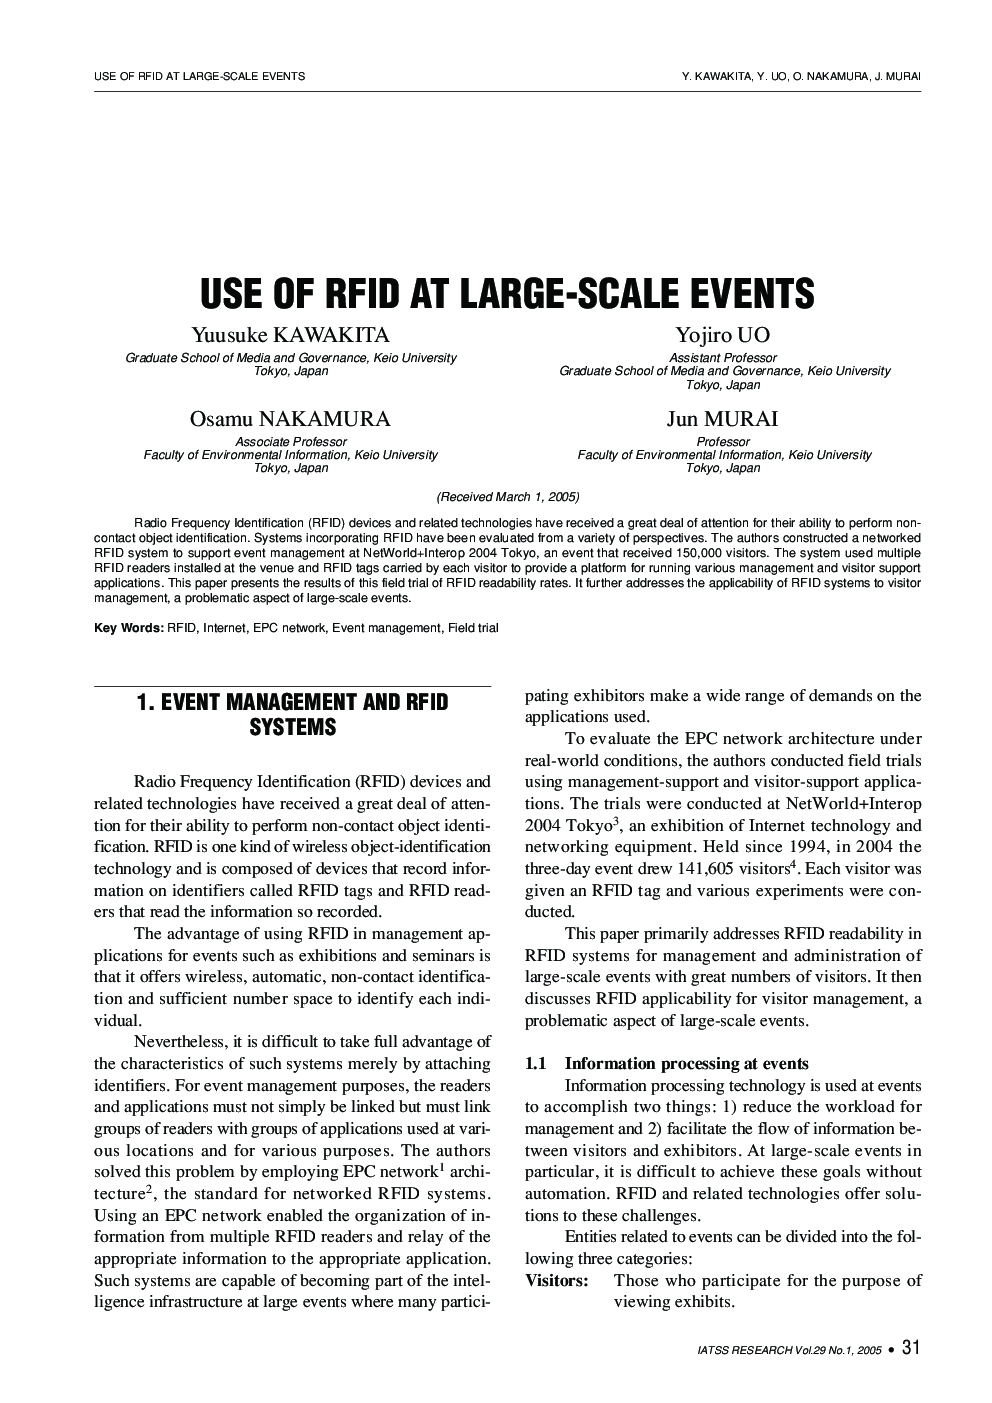 USE OF RFID AT LARGE-SCALE EVENTS